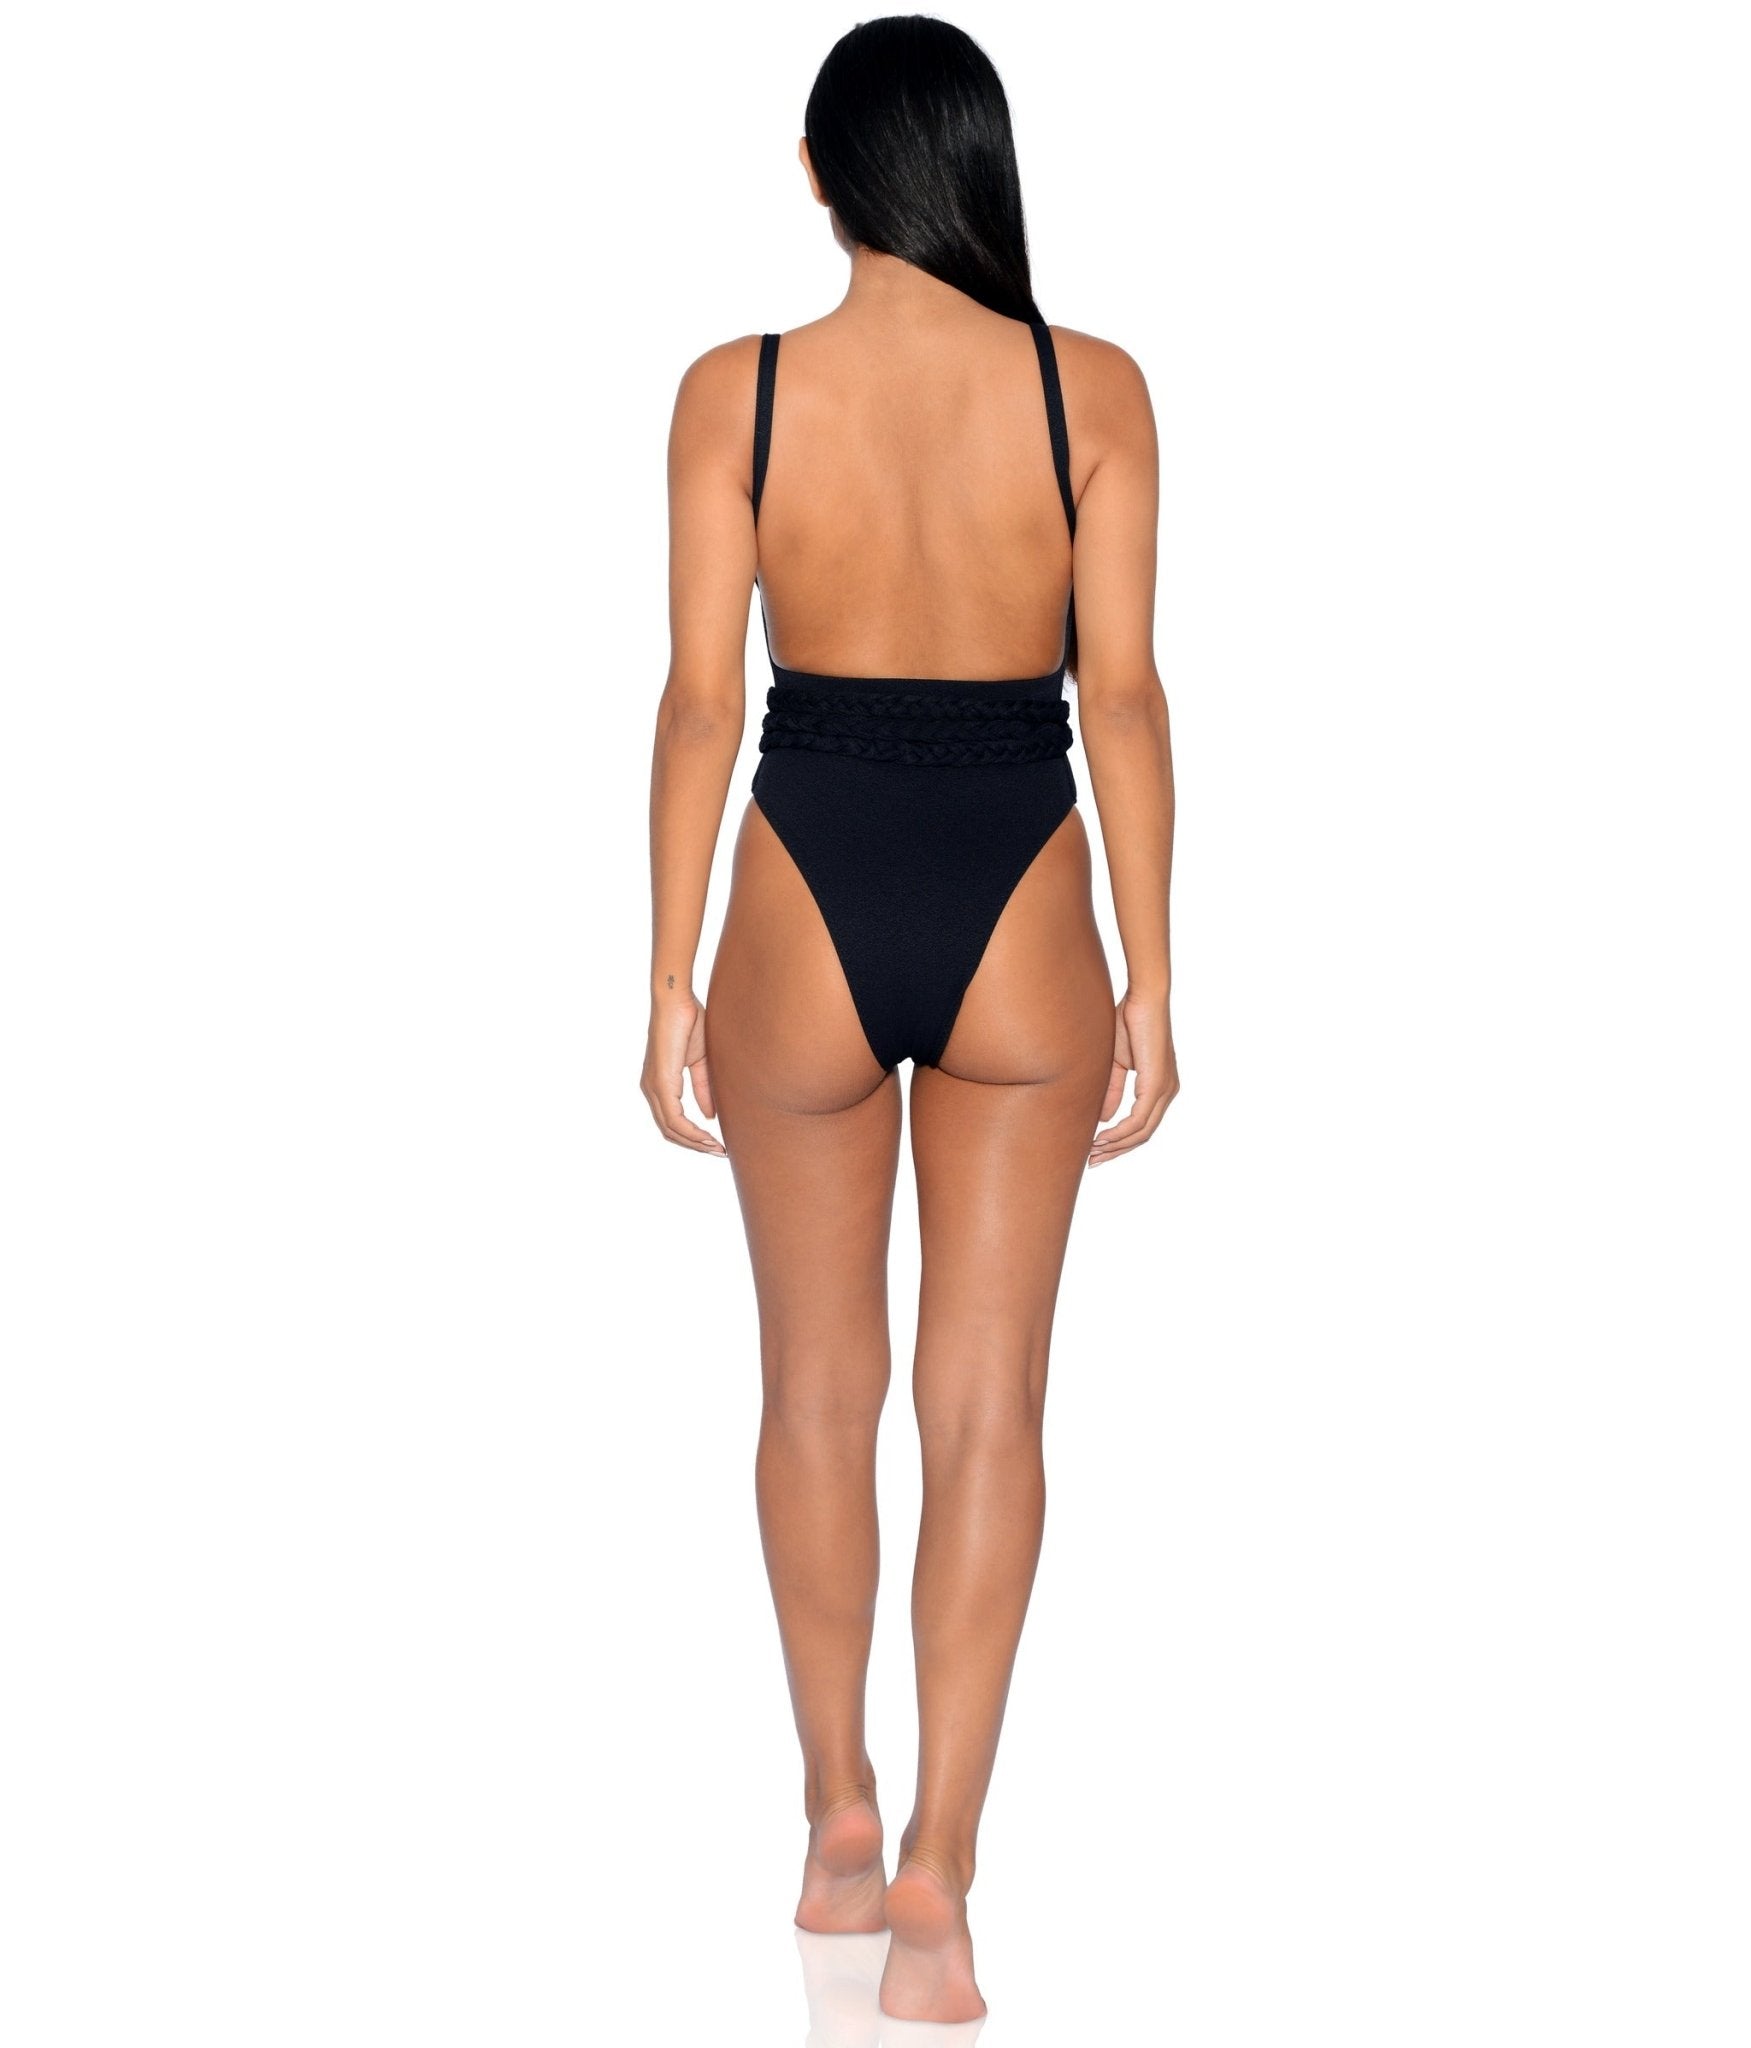 Turquoise Crossed Back Cut-out Belted Swimsuit - One Piece